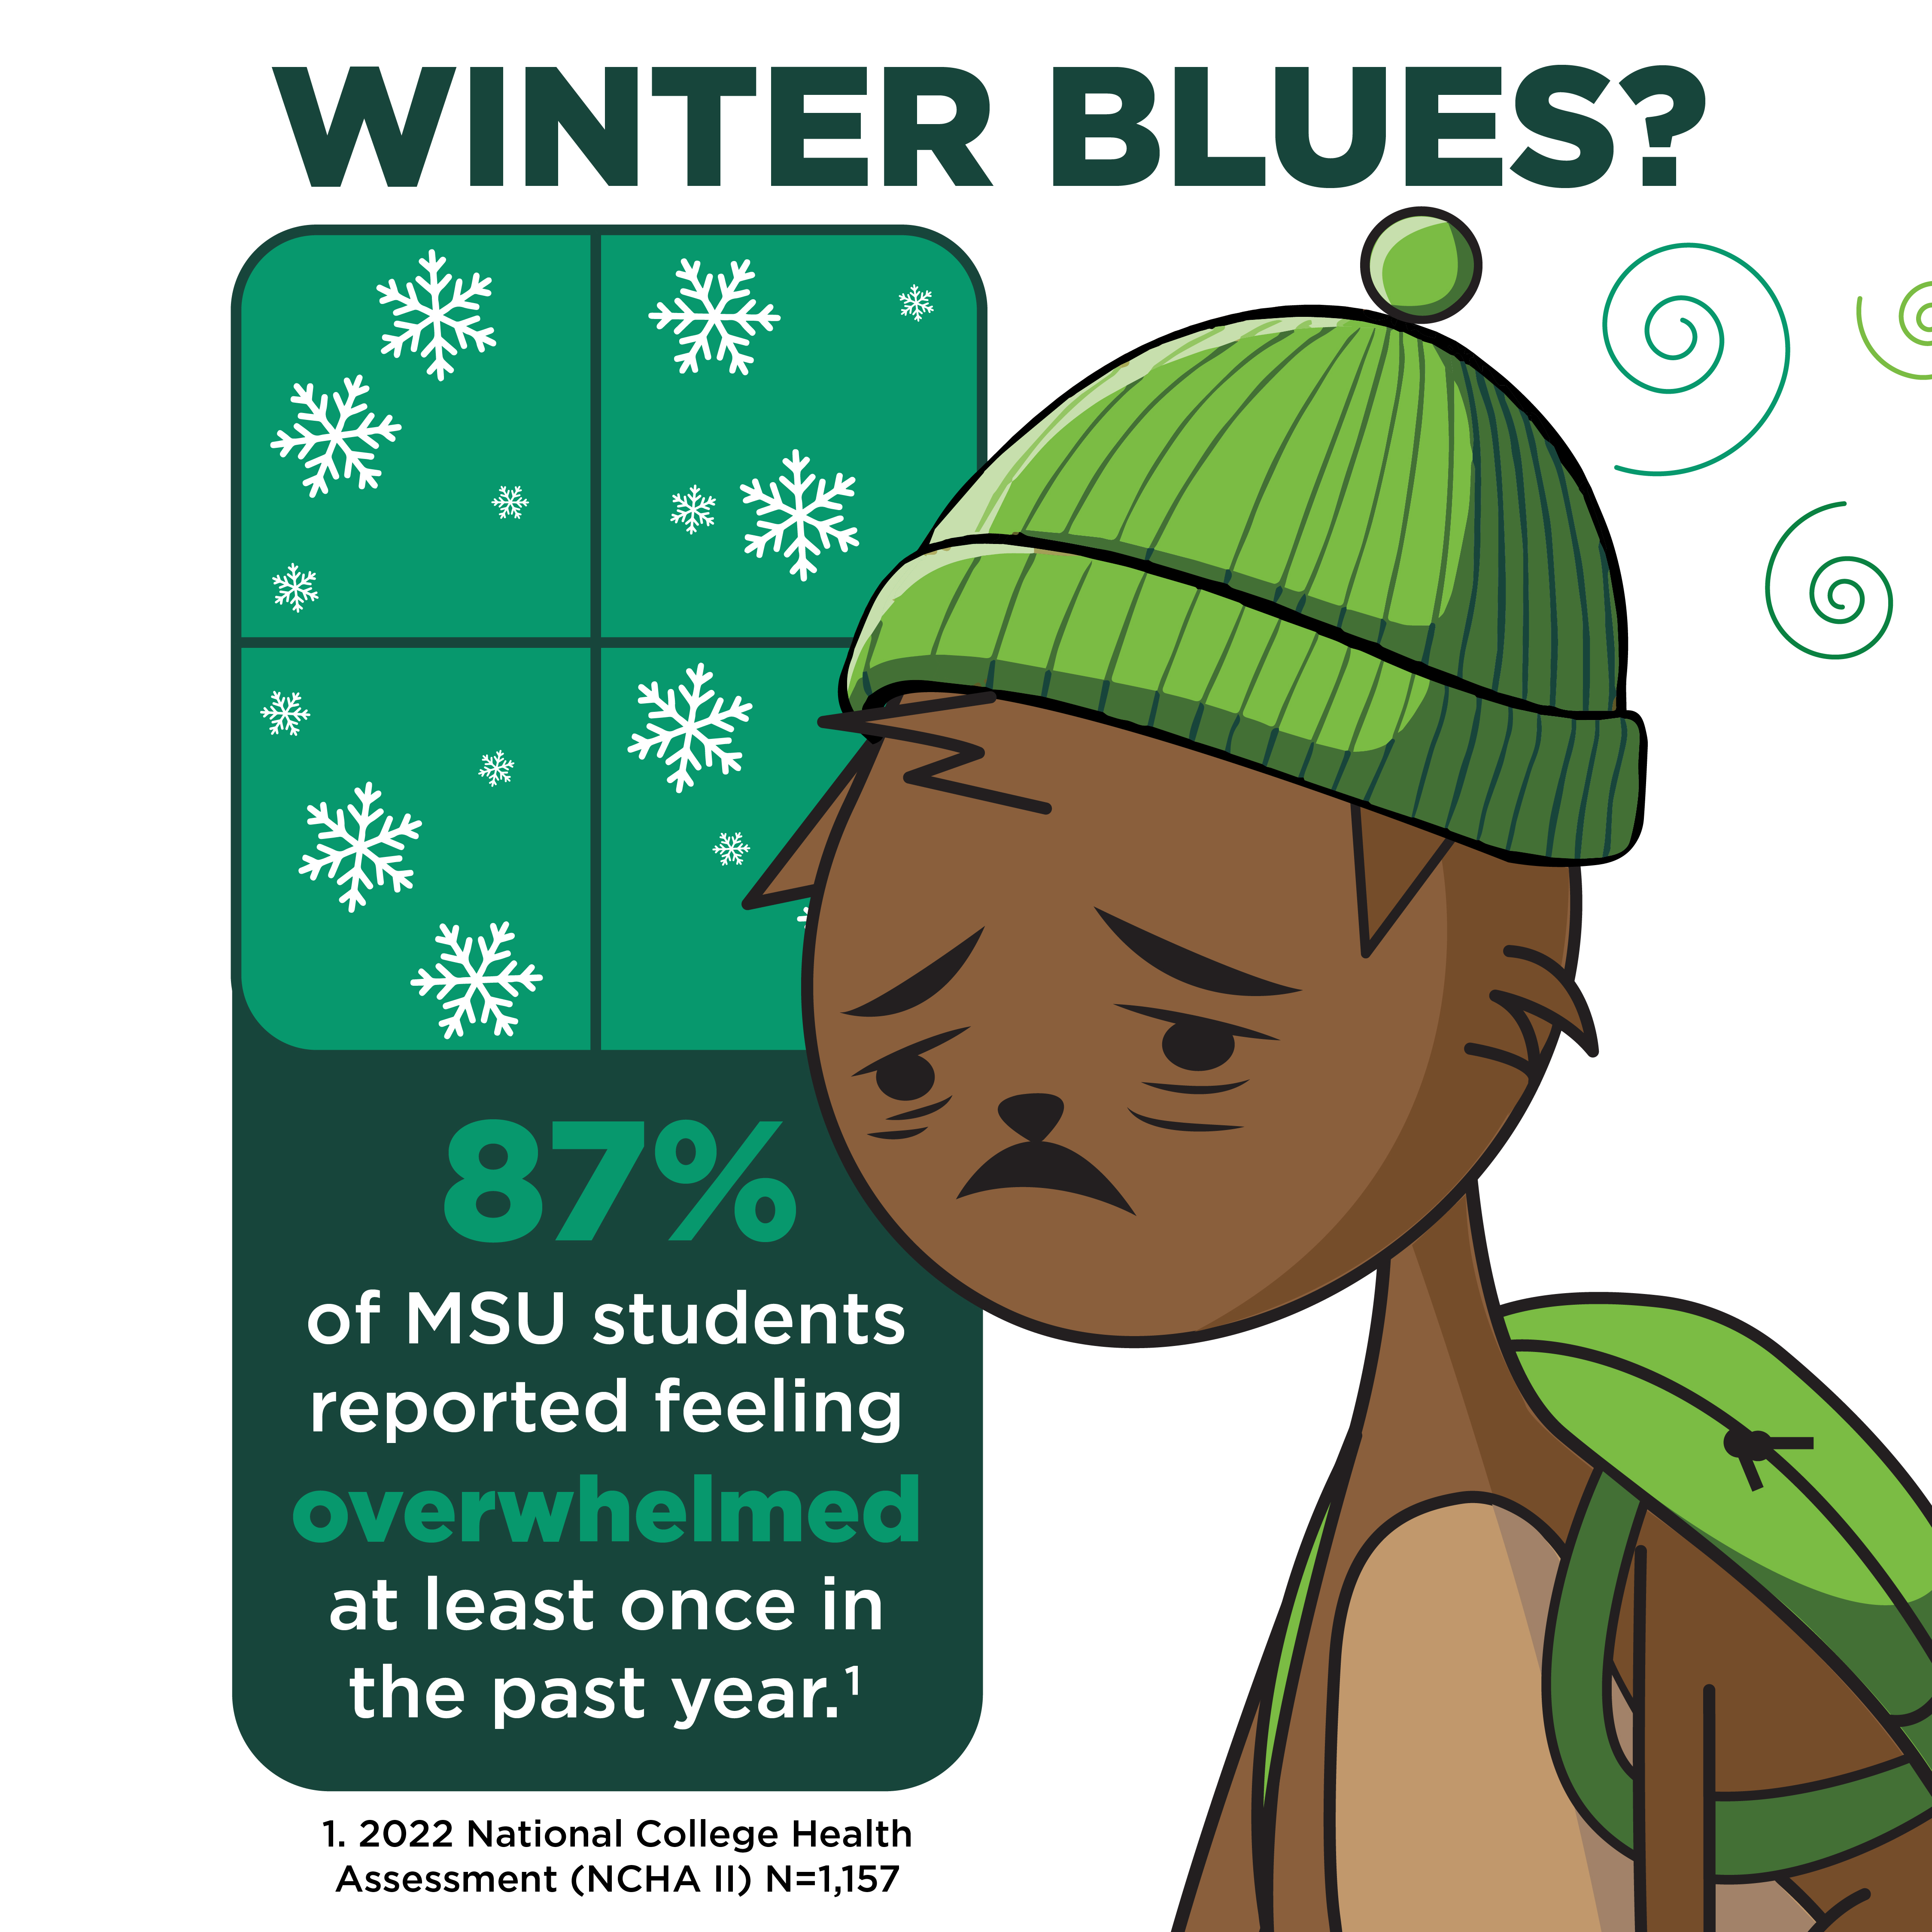 An illustrated squirrel looking sad while wearing a backpack and beanie. It stands near a window with falling snow outside. Text reads, "Winter blues? 87% of MSU students reported feeling overwhelmed at least once in the past year."